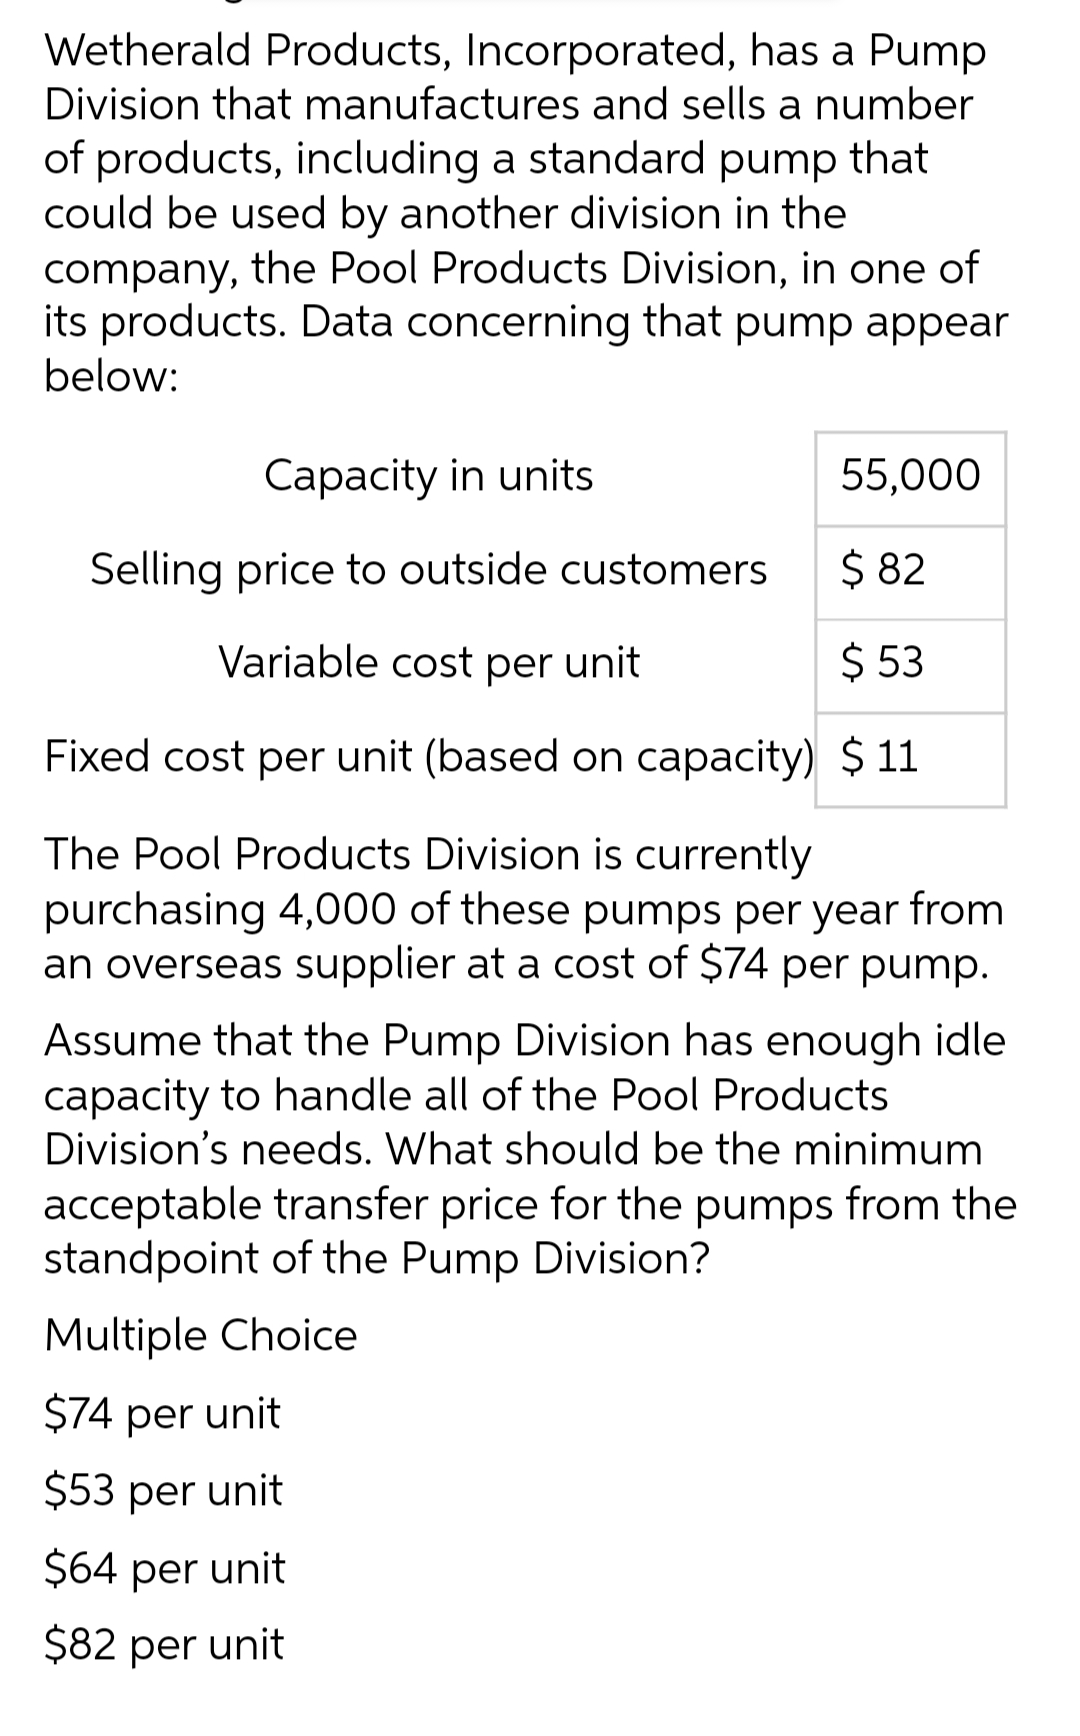 Wetherald Products, Incorporated, has a Pump
Division that manufactures and sells a number
of products, including a standard pump that
could be used by another division in the
company, the Pool Products Division, in one of
its products. Data concerning that pump appear
below:
Capacity in units
55,000
Selling price to outside customers
$ 82
Variable cost per unit
$53
Fixed cost per unit (based on capacity) $11
The Pool Products Division is currently
purchasing 4,000 of these pumps per year from
an overseas supplier at a cost of $74 per pump.
Assume that the Pump Division has enough idle
capacity to handle all of the Pool Products
Division's needs. What should be the minimum
acceptable transfer price for the pumps from the
standpoint of the Pump Division?
Multiple Choice
$74 per unit
$53 per unit
$64 per unit
$82 per unit